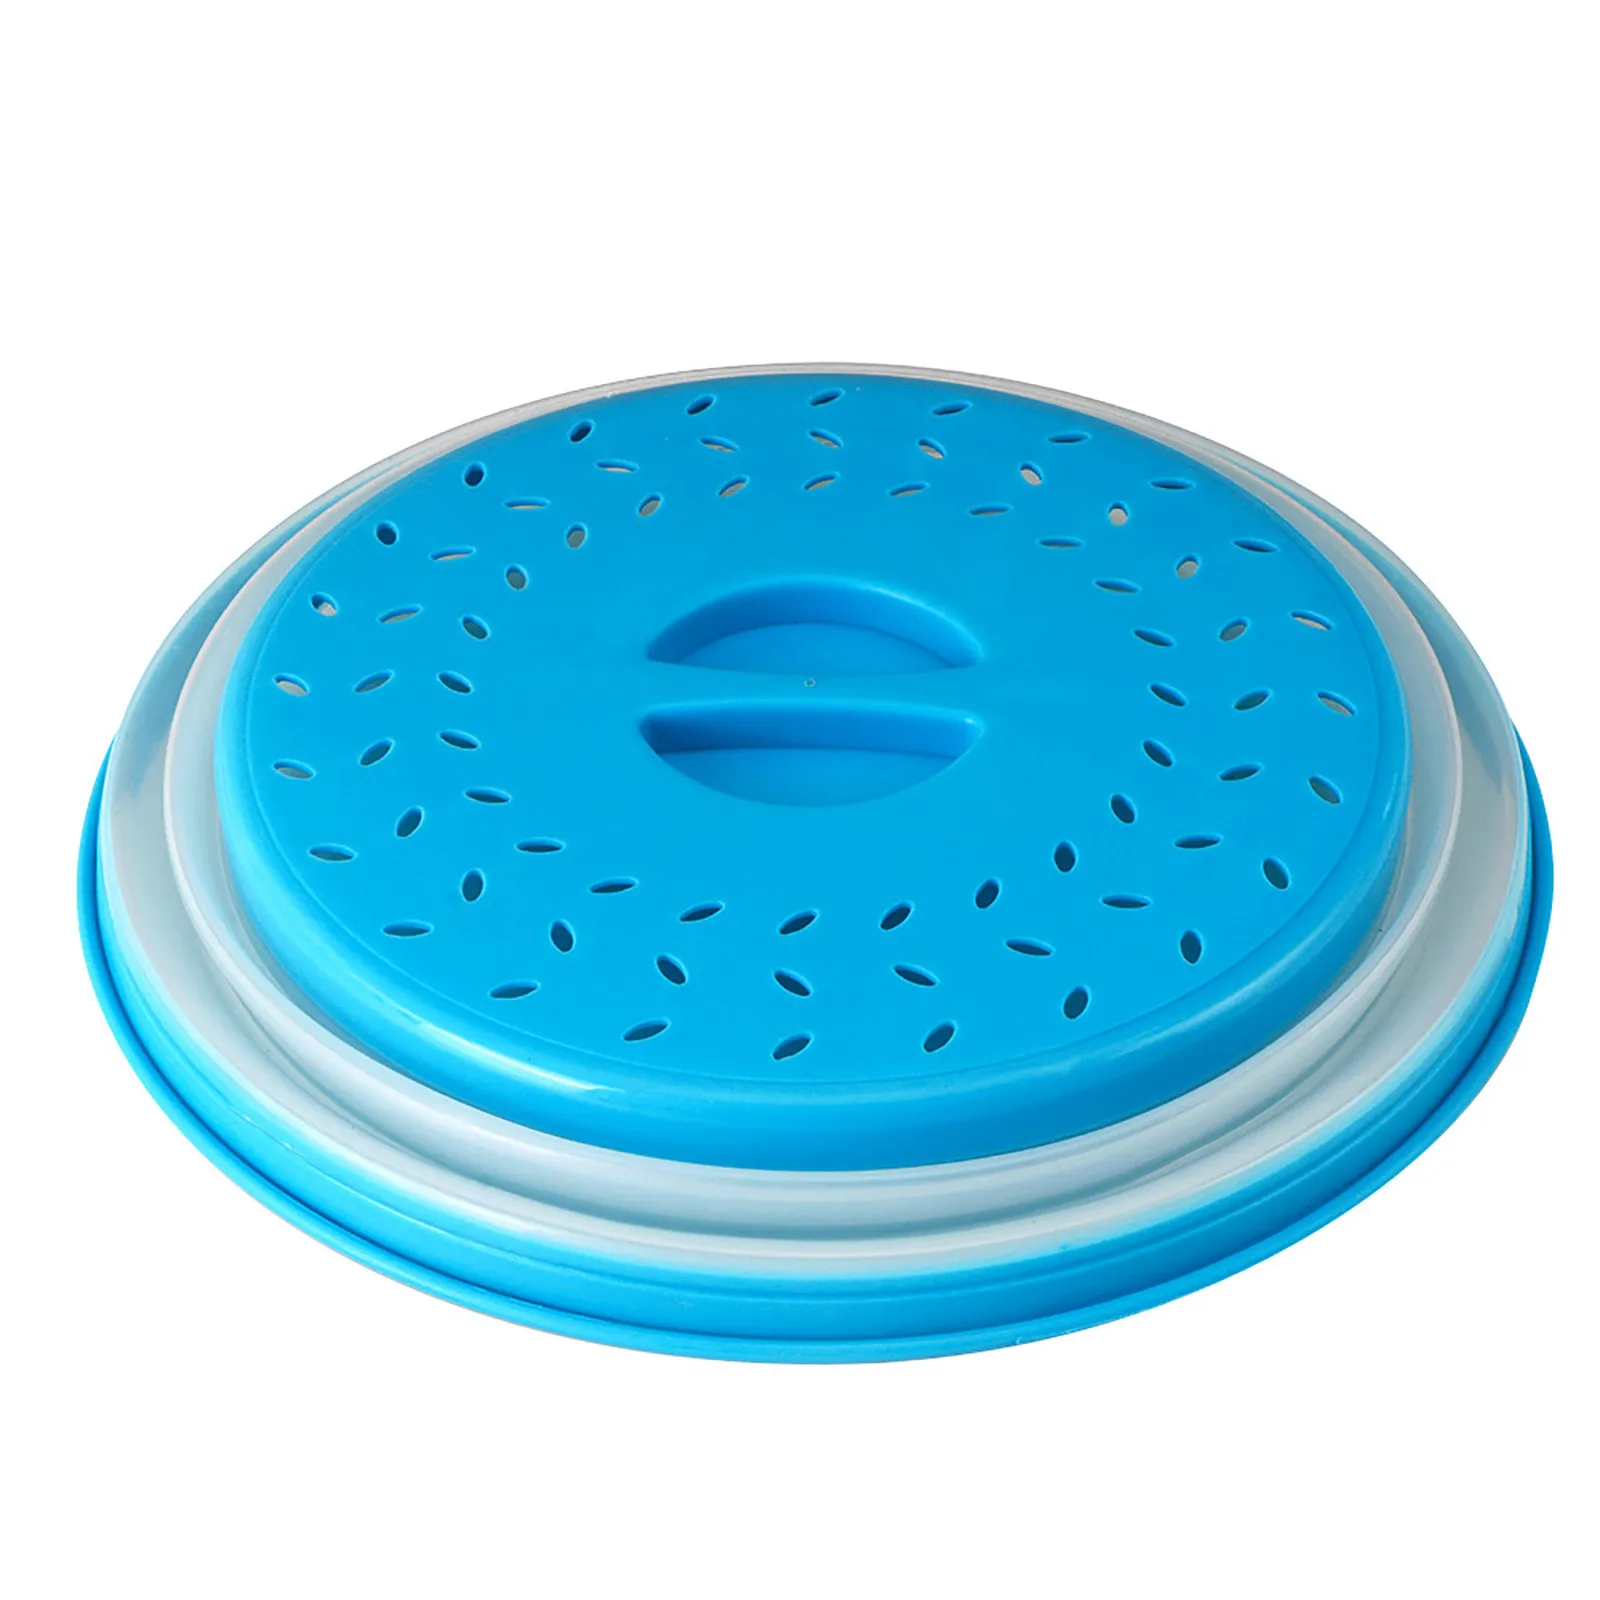 Blue OUCHAN Collapsible Microwave Plate Cover Colander Strainer for Fruit Vegetables,BAP Free and Non-Toxic 